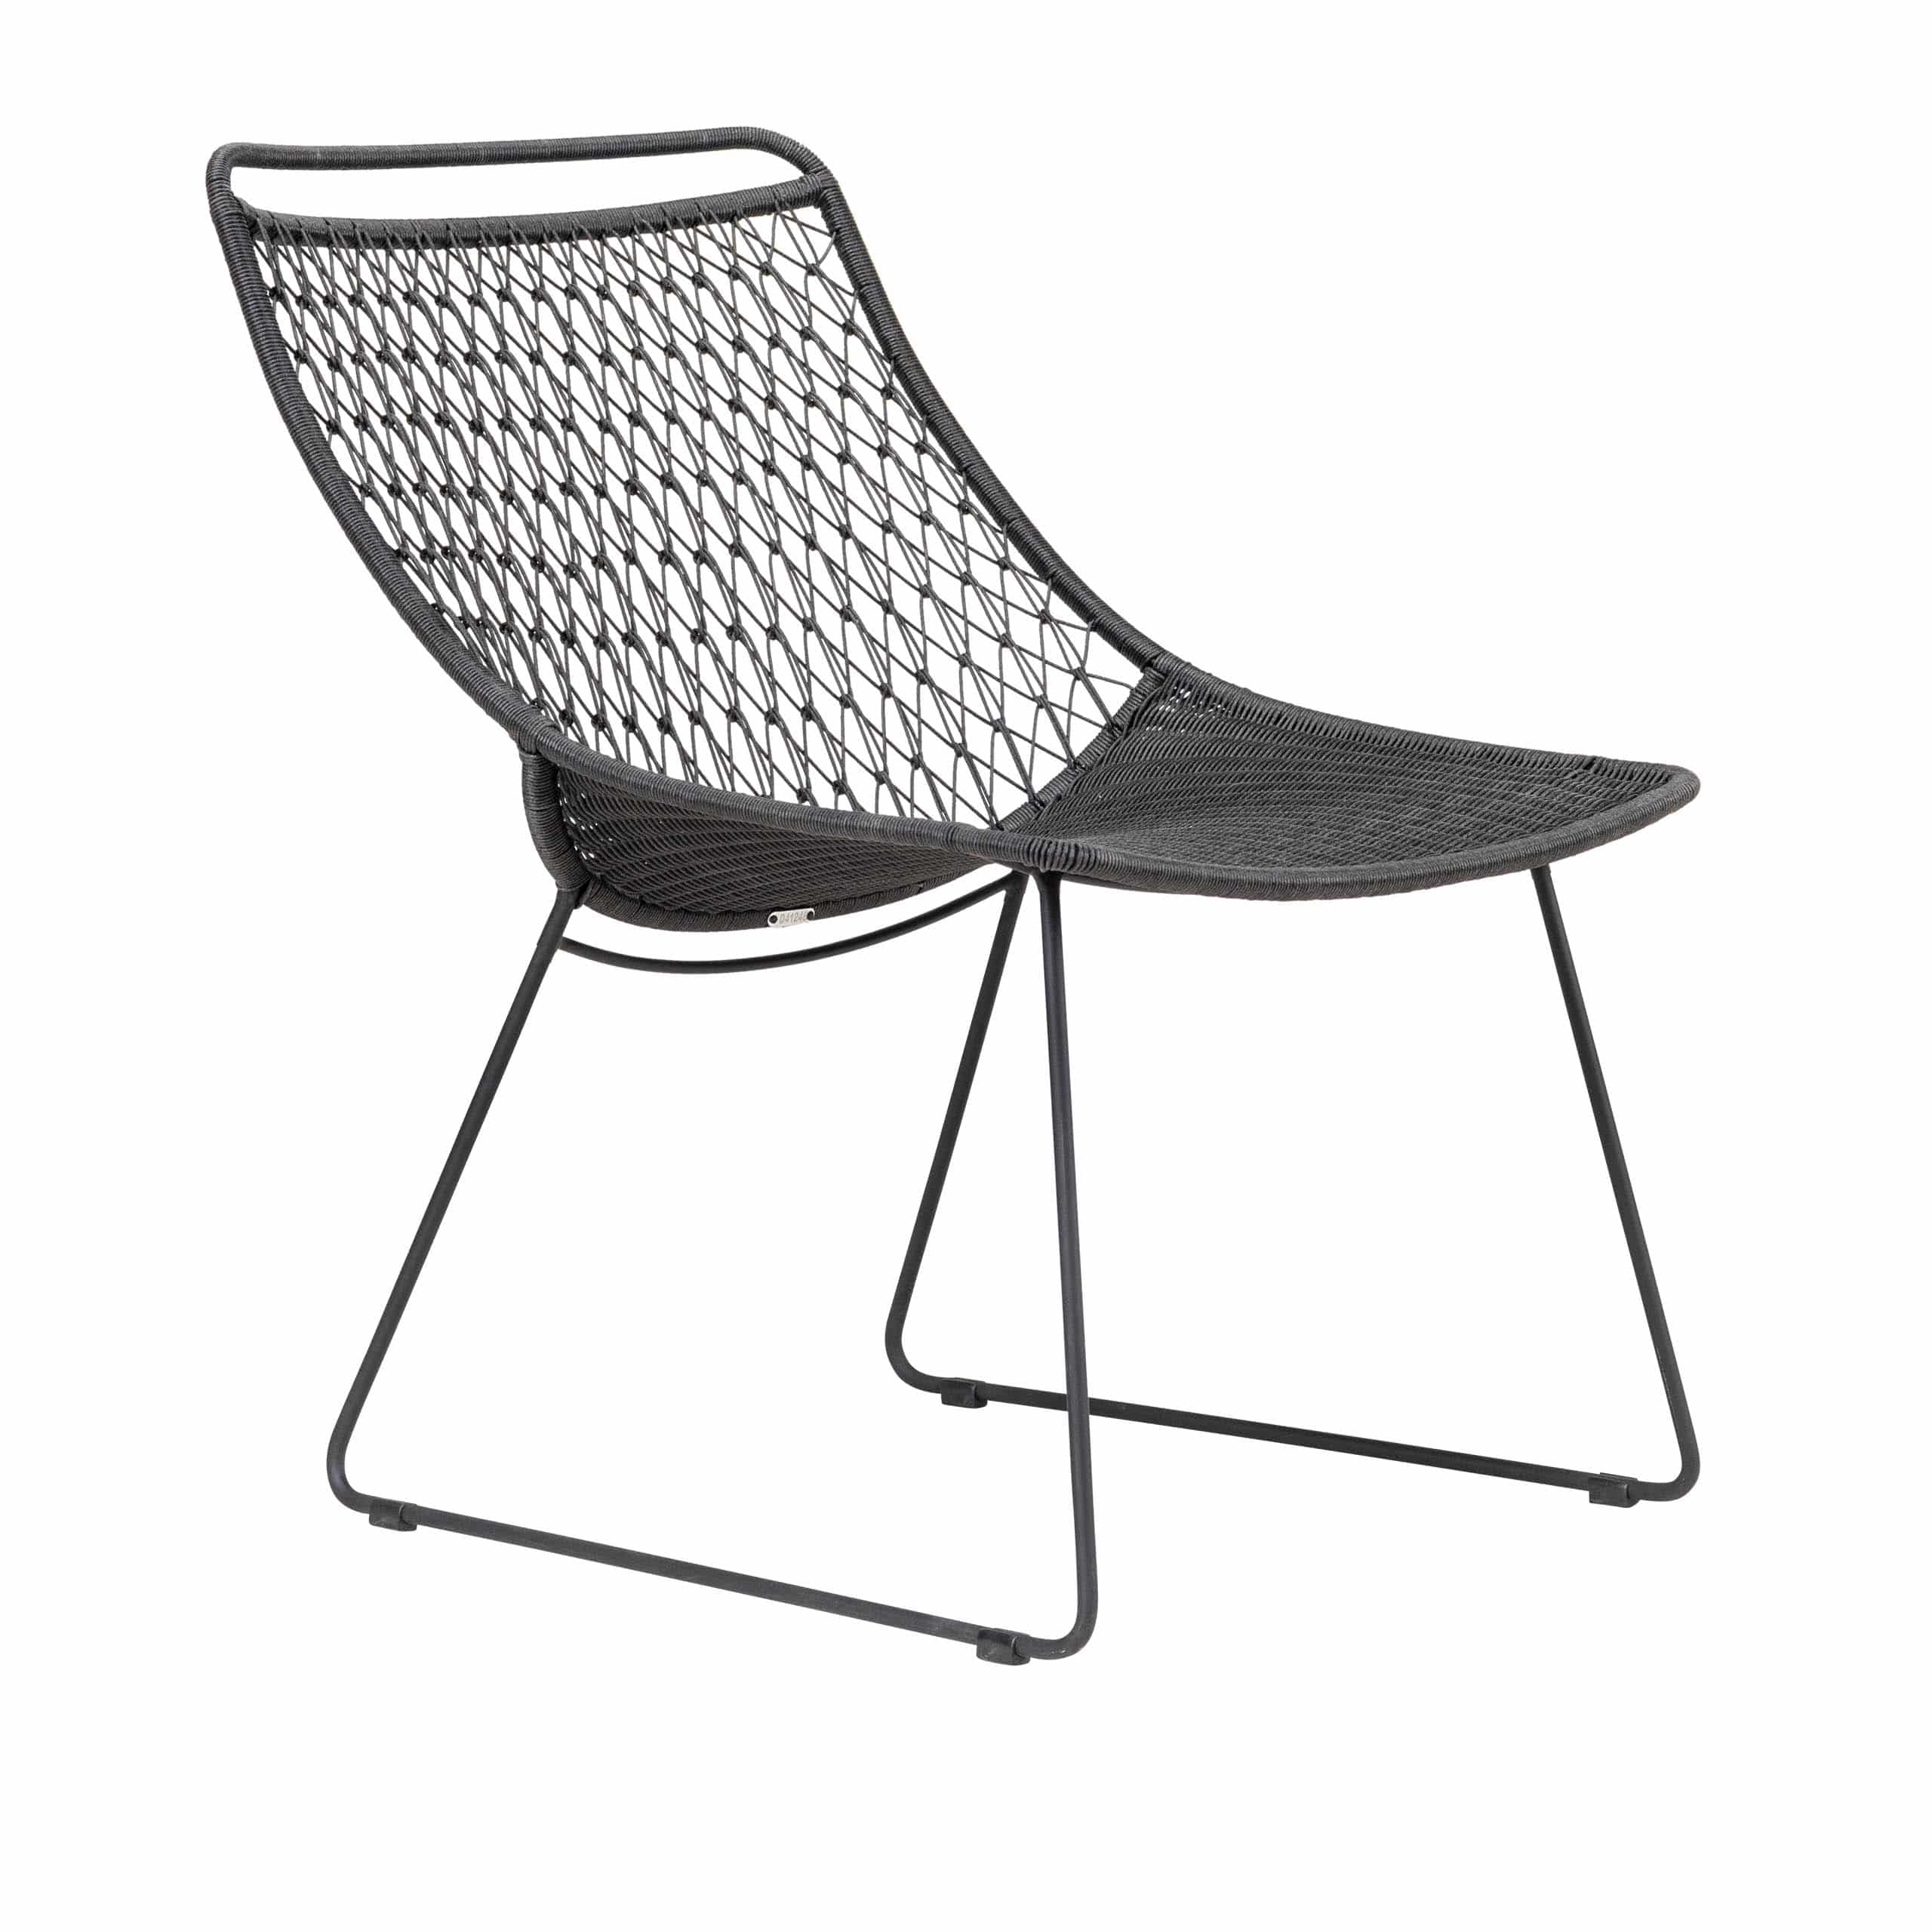 Design Warehouse - 128344 - Milly Outdoor Relaxing Chair  - Lava